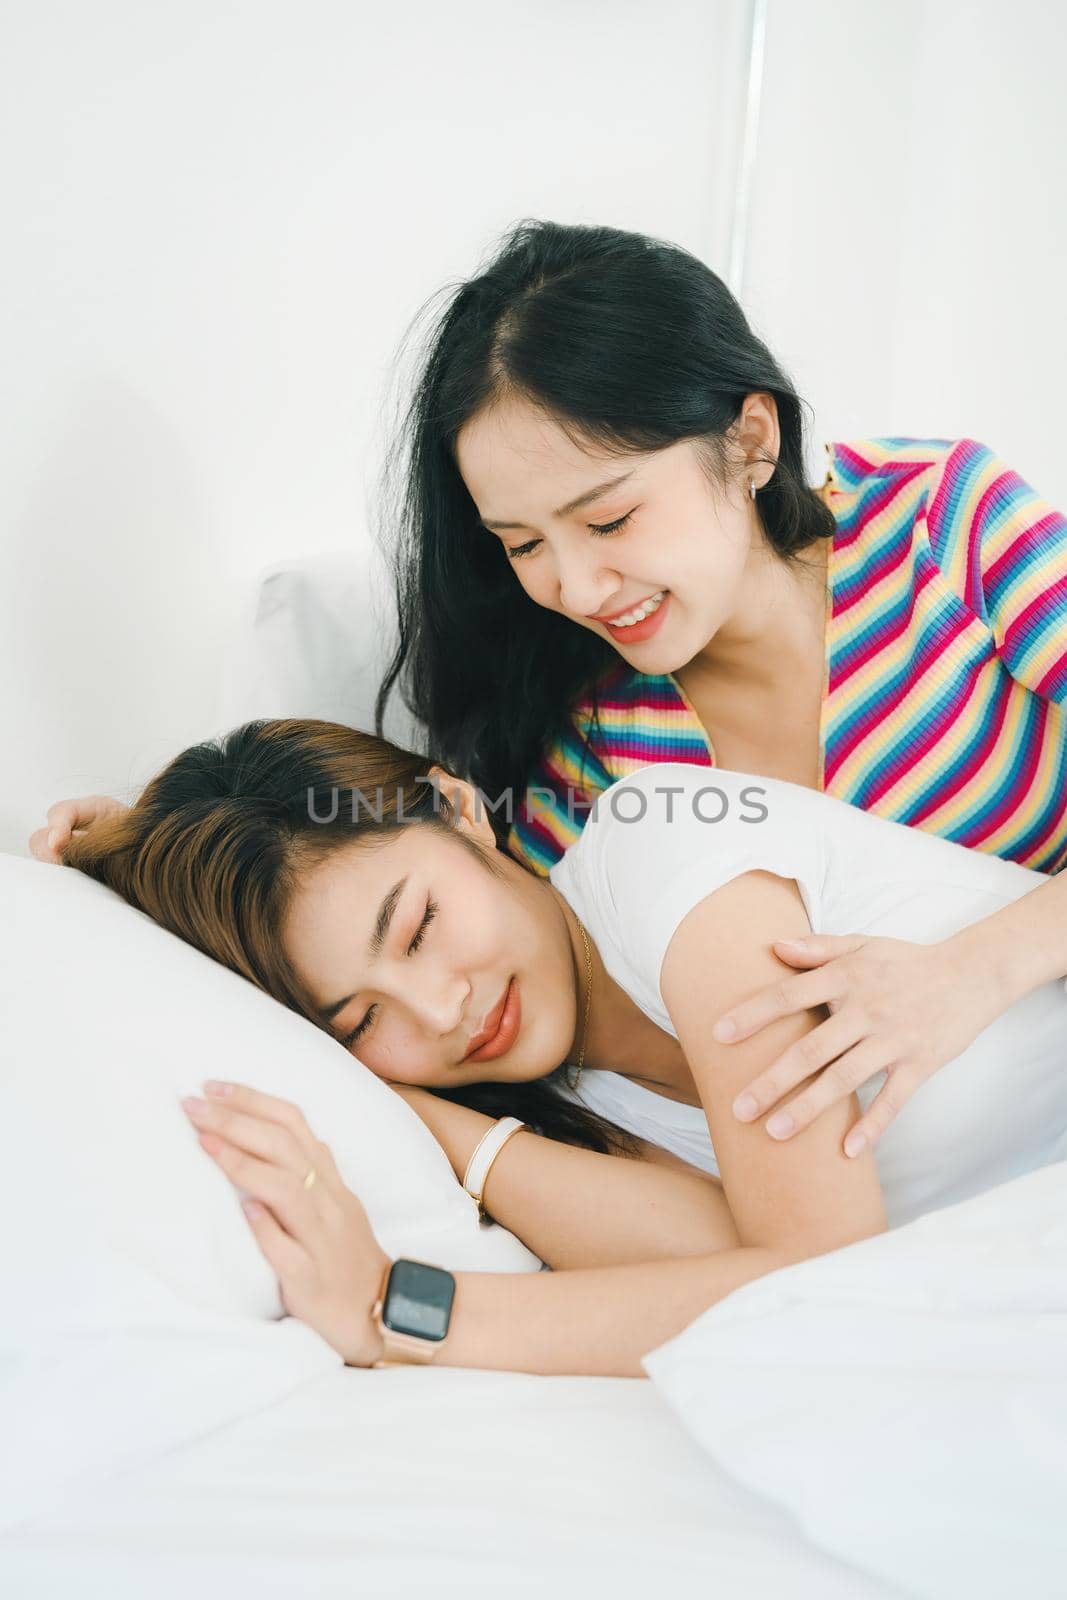 lgbtq, lgbt concept, homosexuality, portrait of two Asian women posing happy together and showing love for each other while being together at bedroom by Manastrong